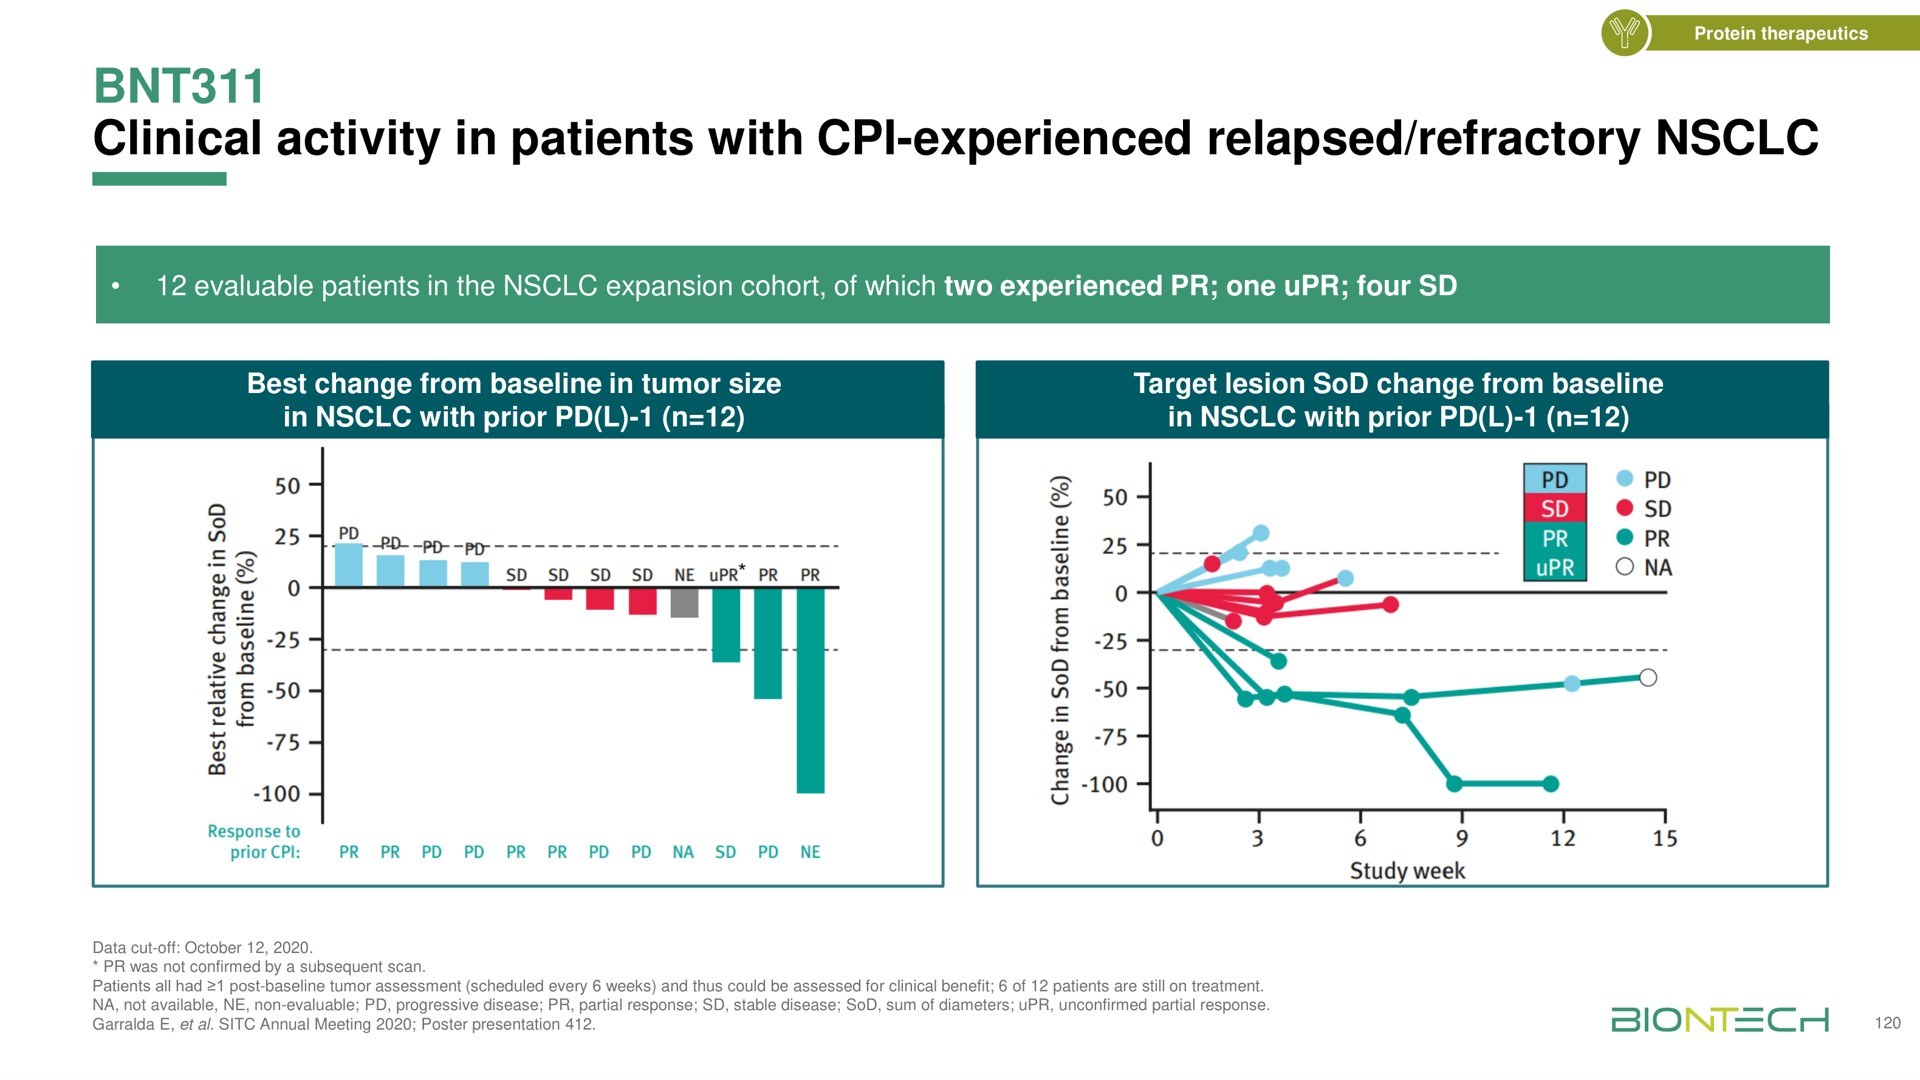 clinical activity in patients with experienced relapsed refractory experienced | BioNTech